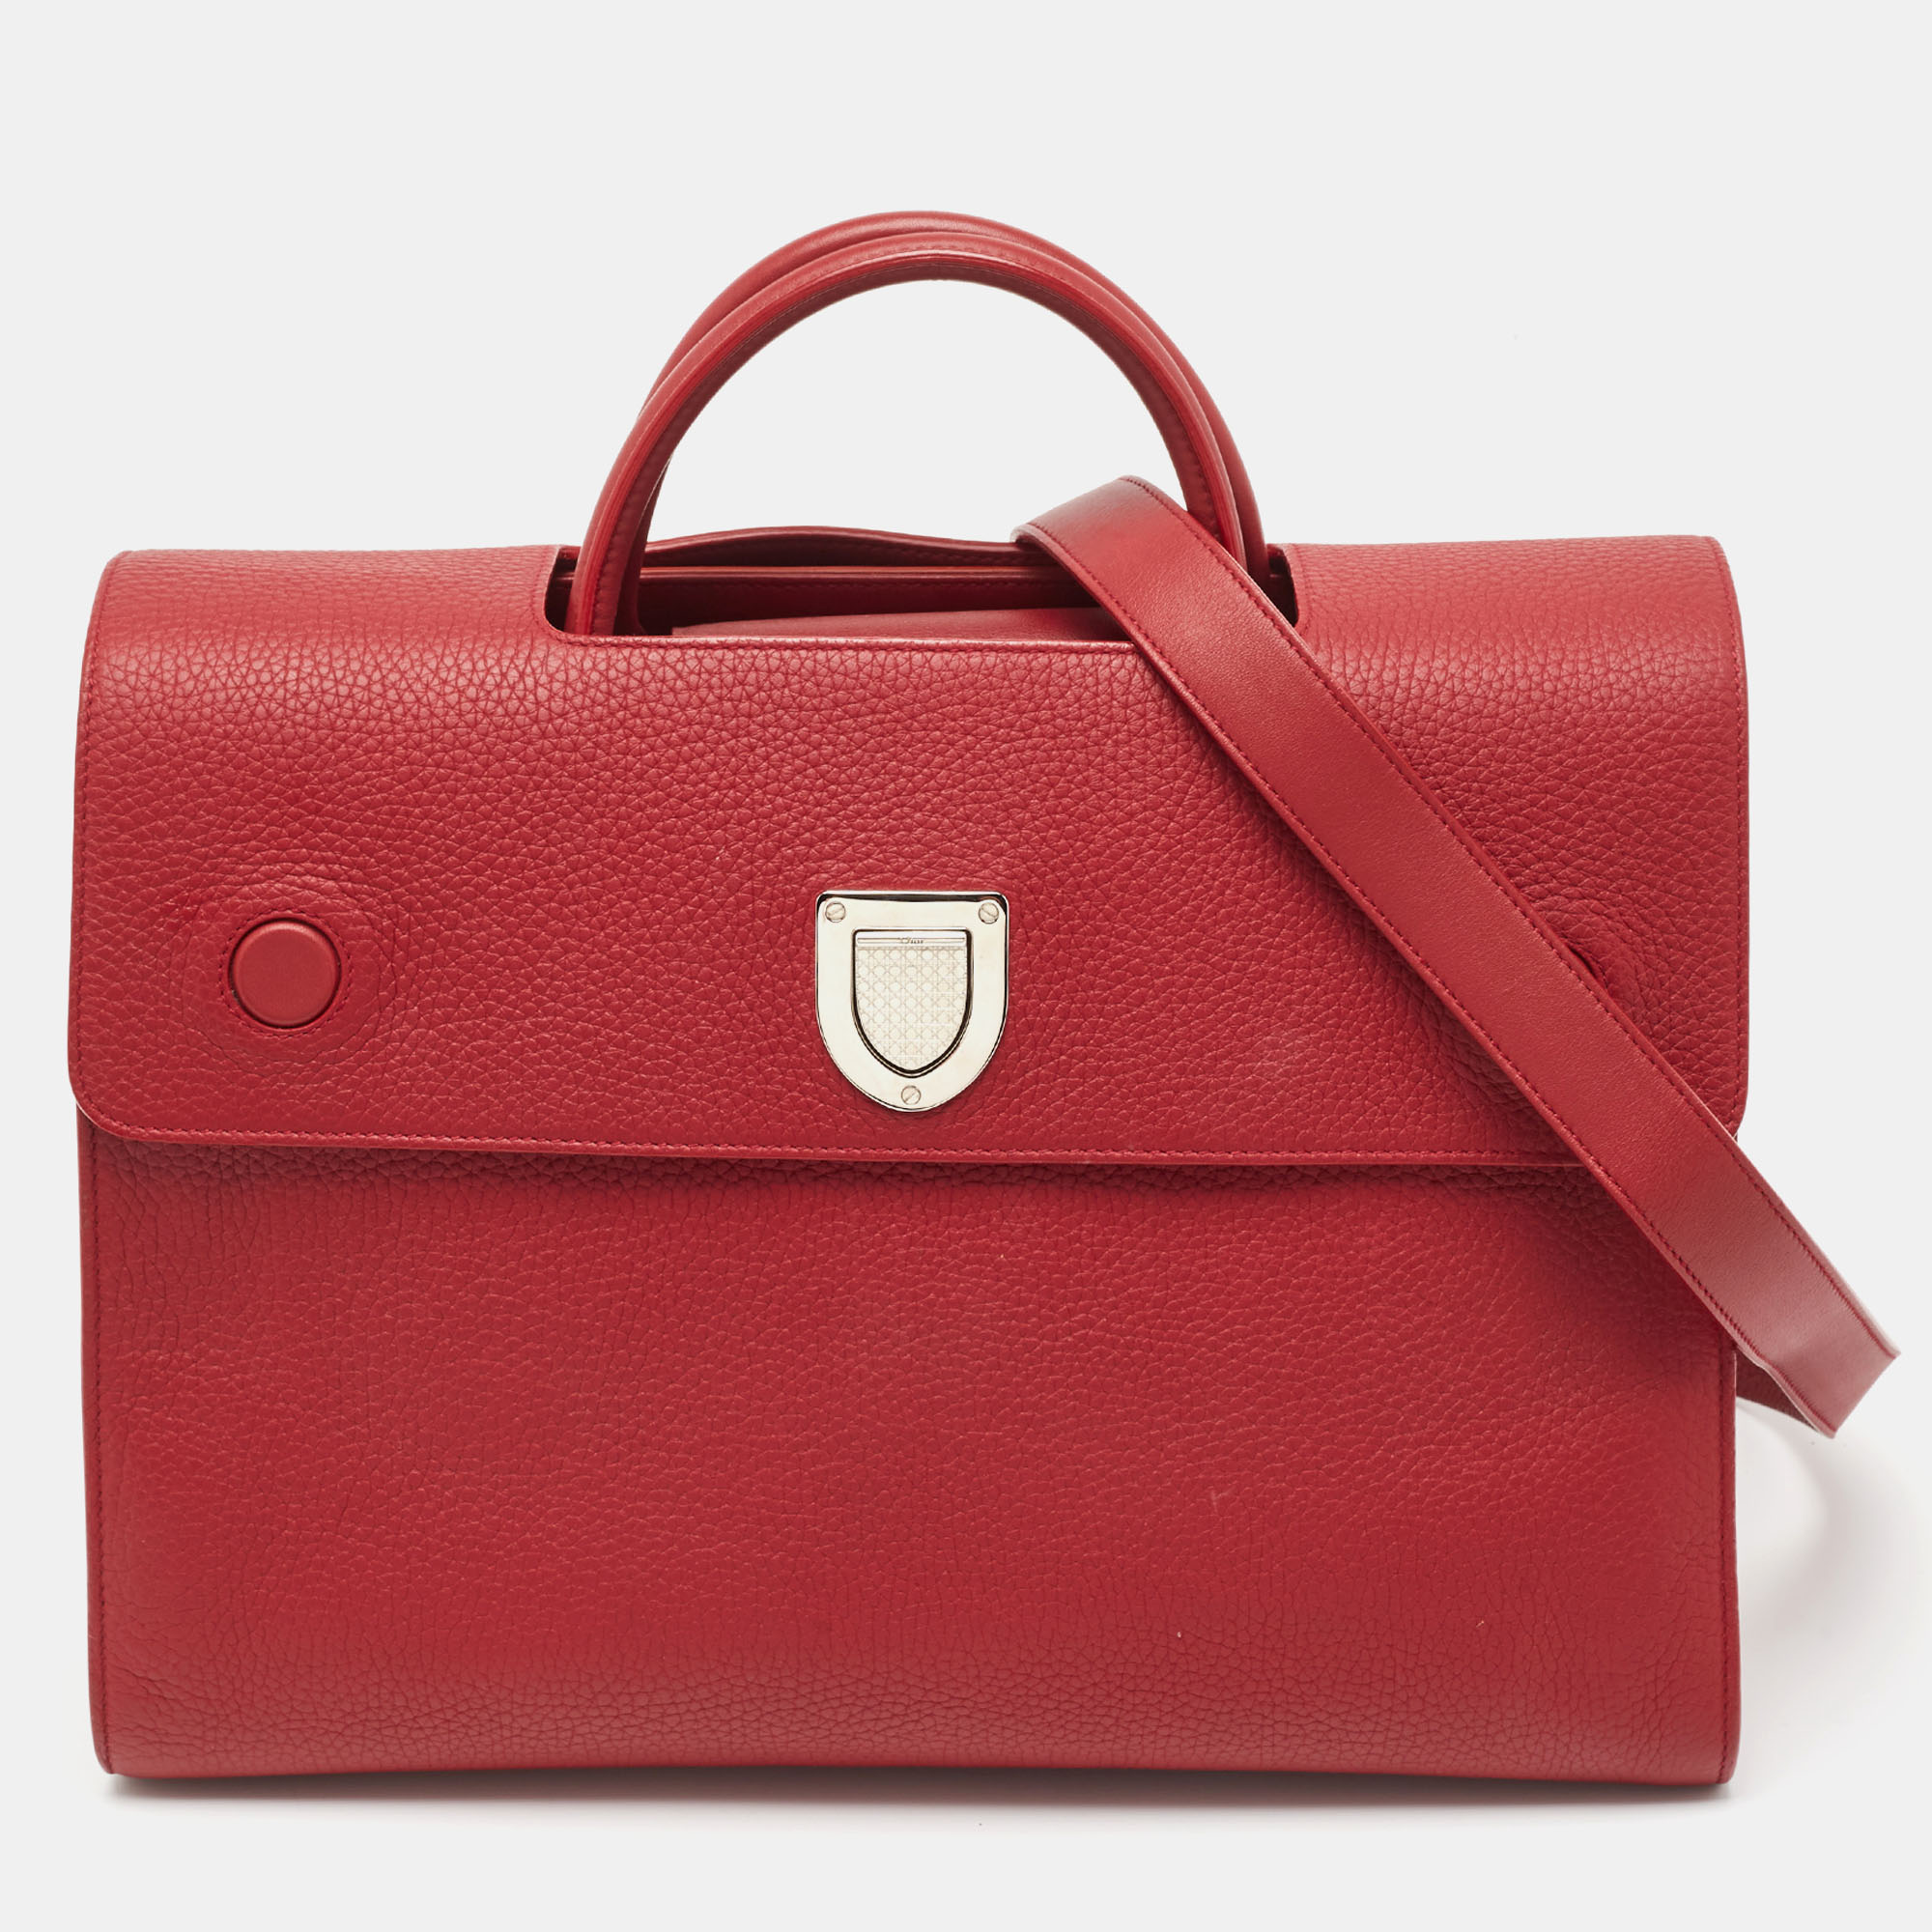 Dior Red Leather Large Diorever Top Handle Bag